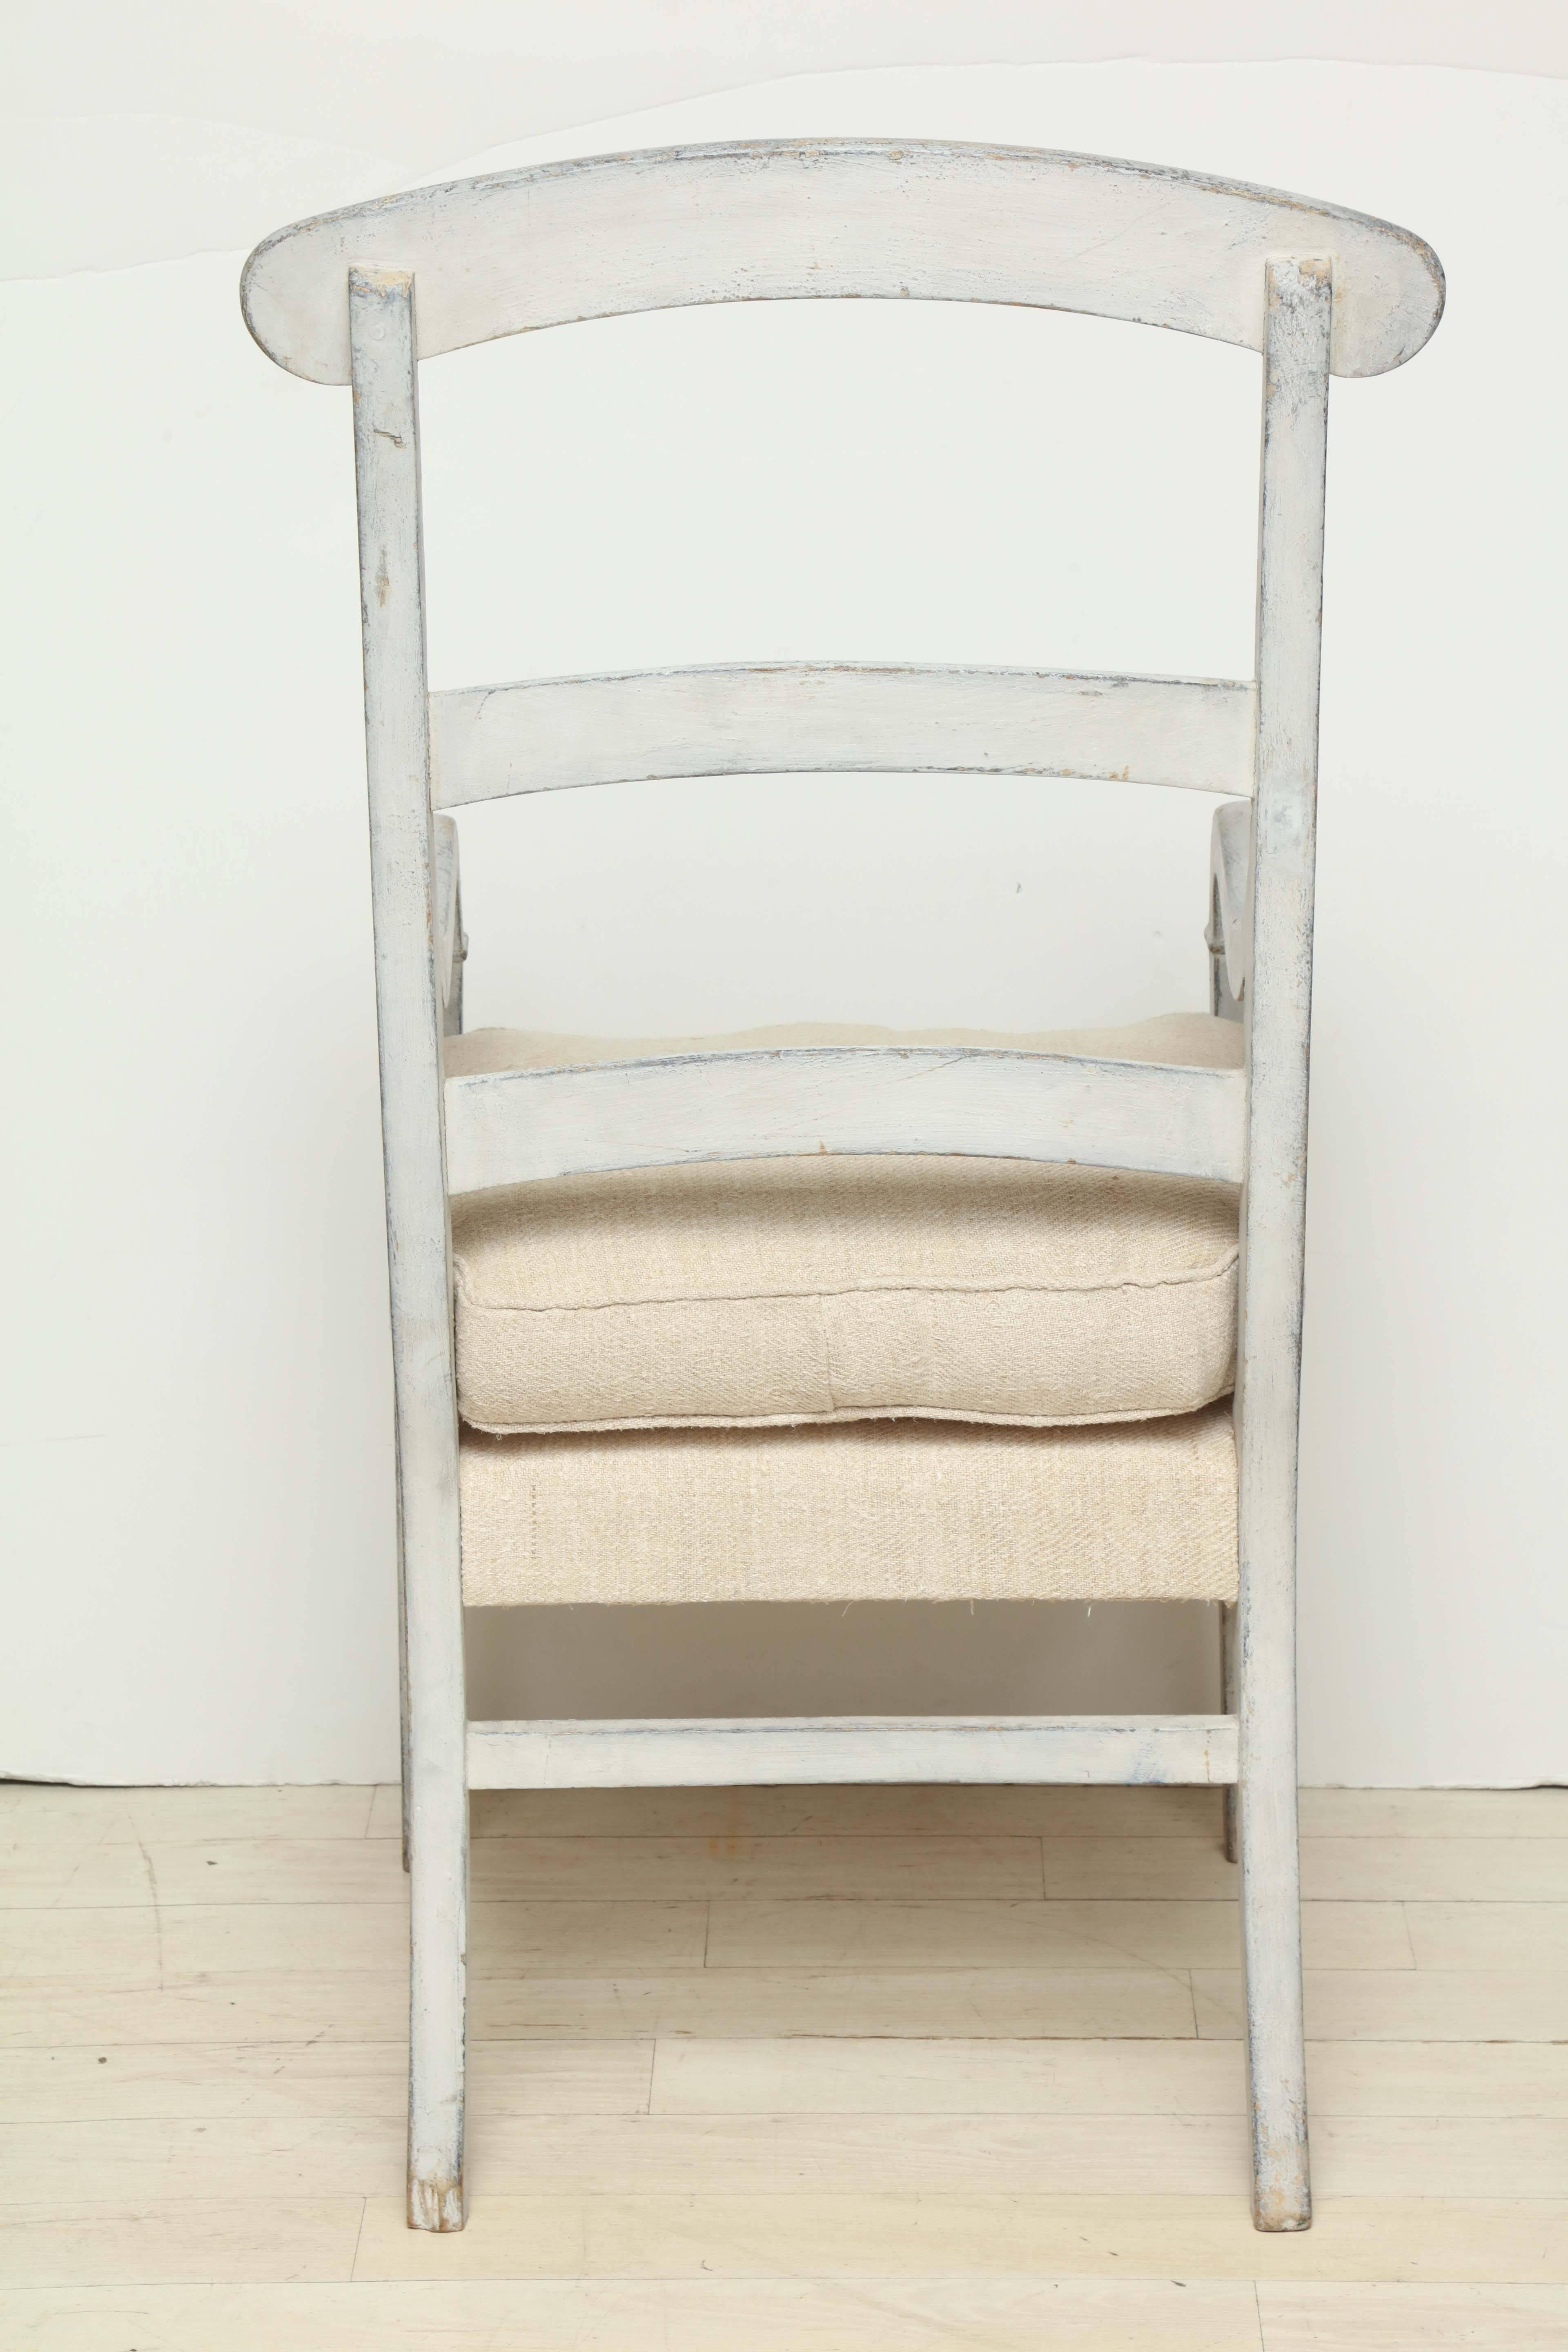 19th Century French Ladder Back Painted Wood Arm Chair with Linen Cushion For Sale 6